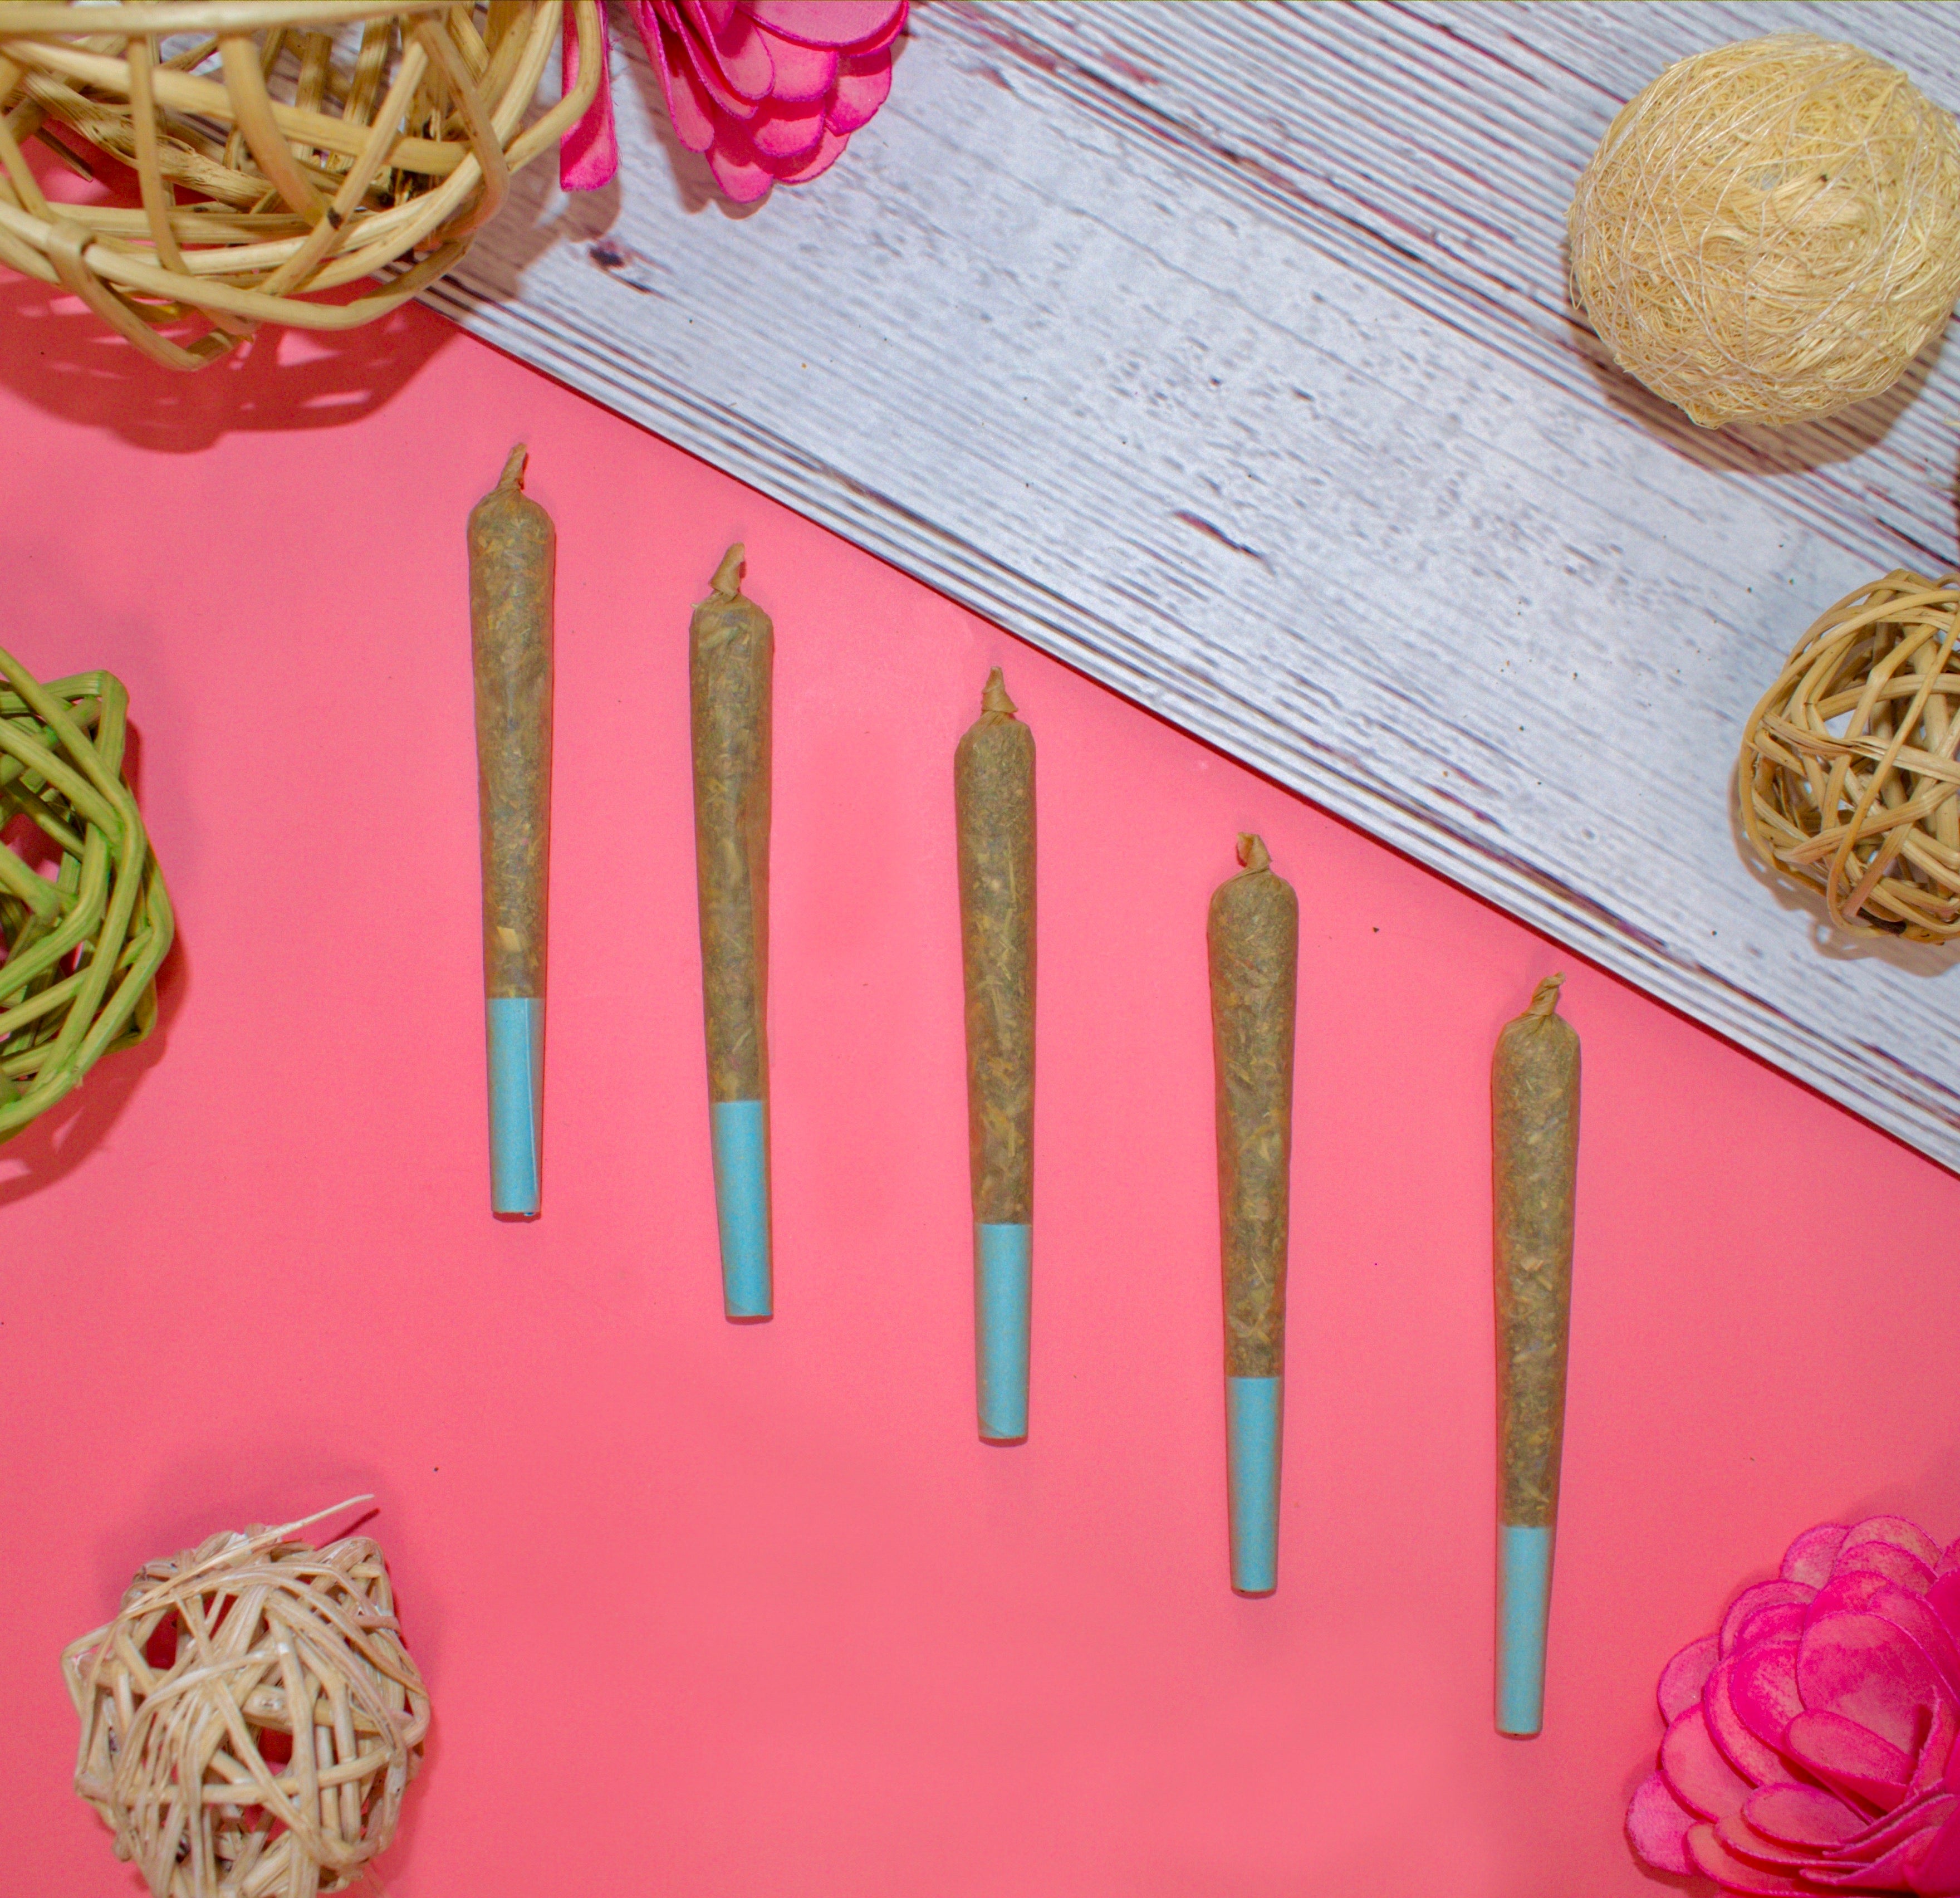 Image Description: On a pink background sits five herbal prerolls wrapped in brown, unbleached plant-fiber paper with blue filters, filled with the herbal smoking blend Time to Chill from the Sono Herbs herbal apothecary, a trans-woman owned shop specializing in tobacco-substitutes. The ingredients inside are: Marigold, Klip Dagga, Rosemary, Mullein, Skullcap & Lavender. Prerolls are also known as Herbal Spliffs, Herbal Cigarettes, Herbs & Flowers smokes, or Herb Tokes.